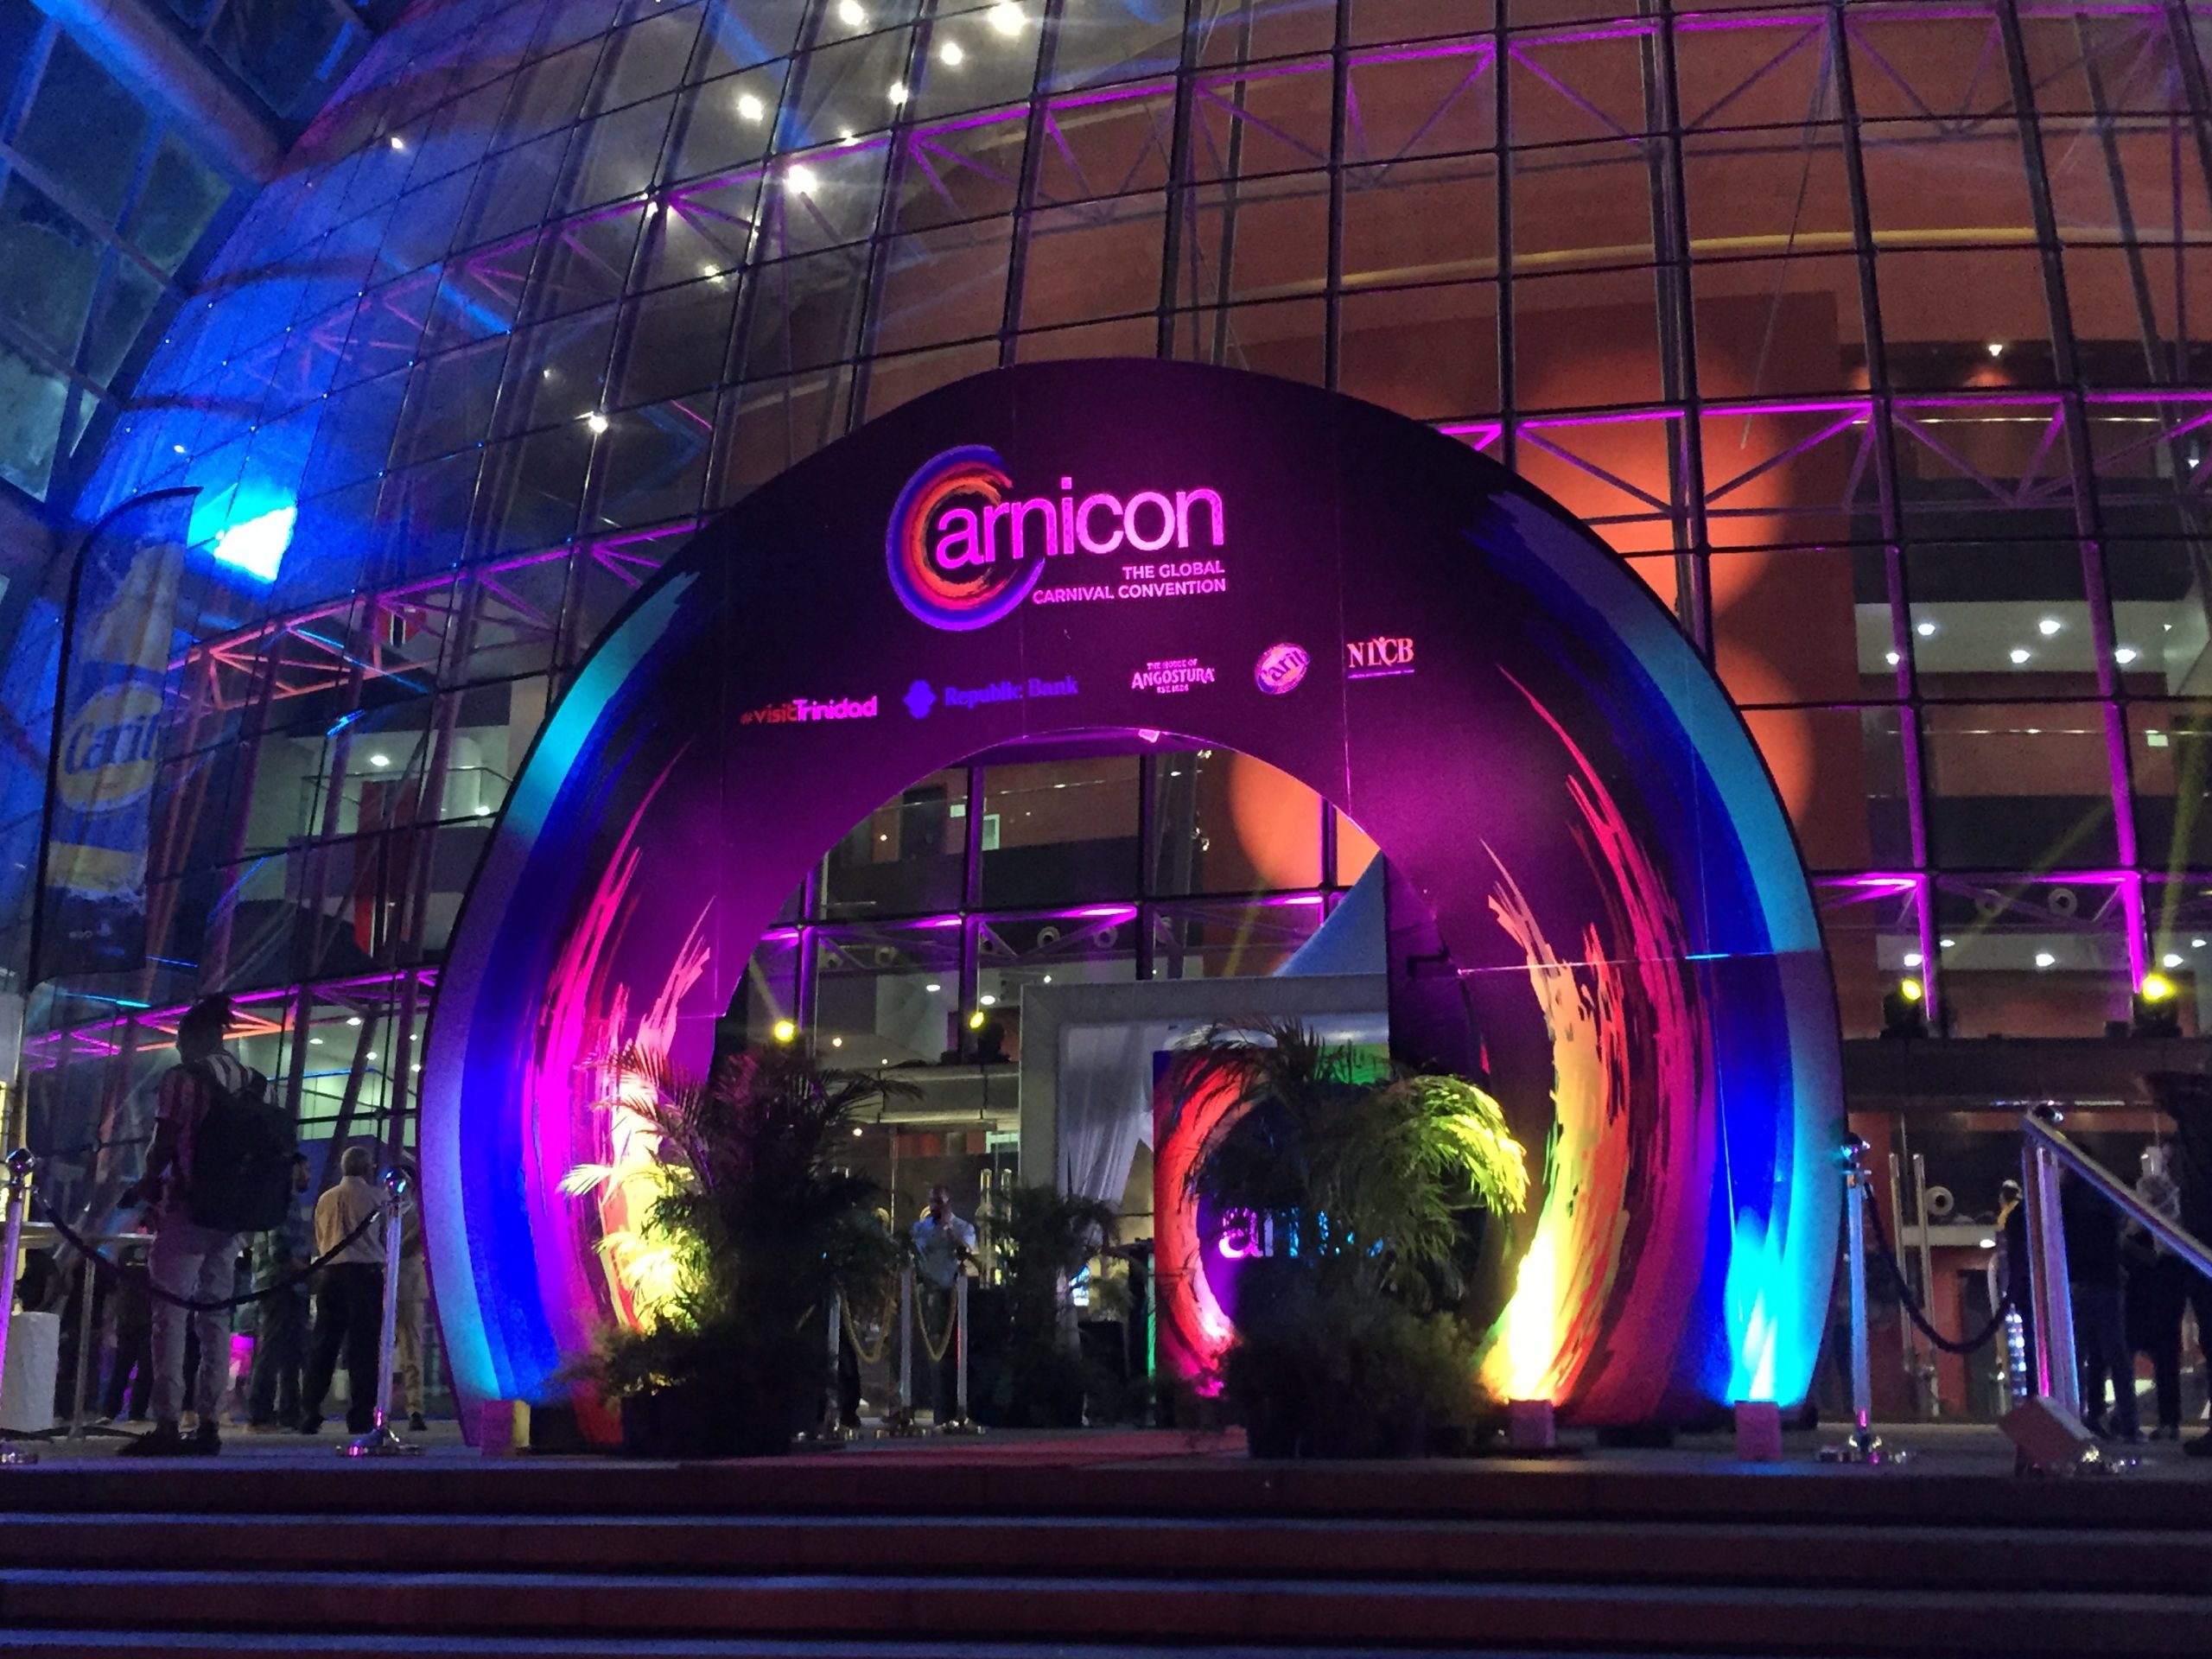 Carnicon – ‘The Global Carnival Convention’